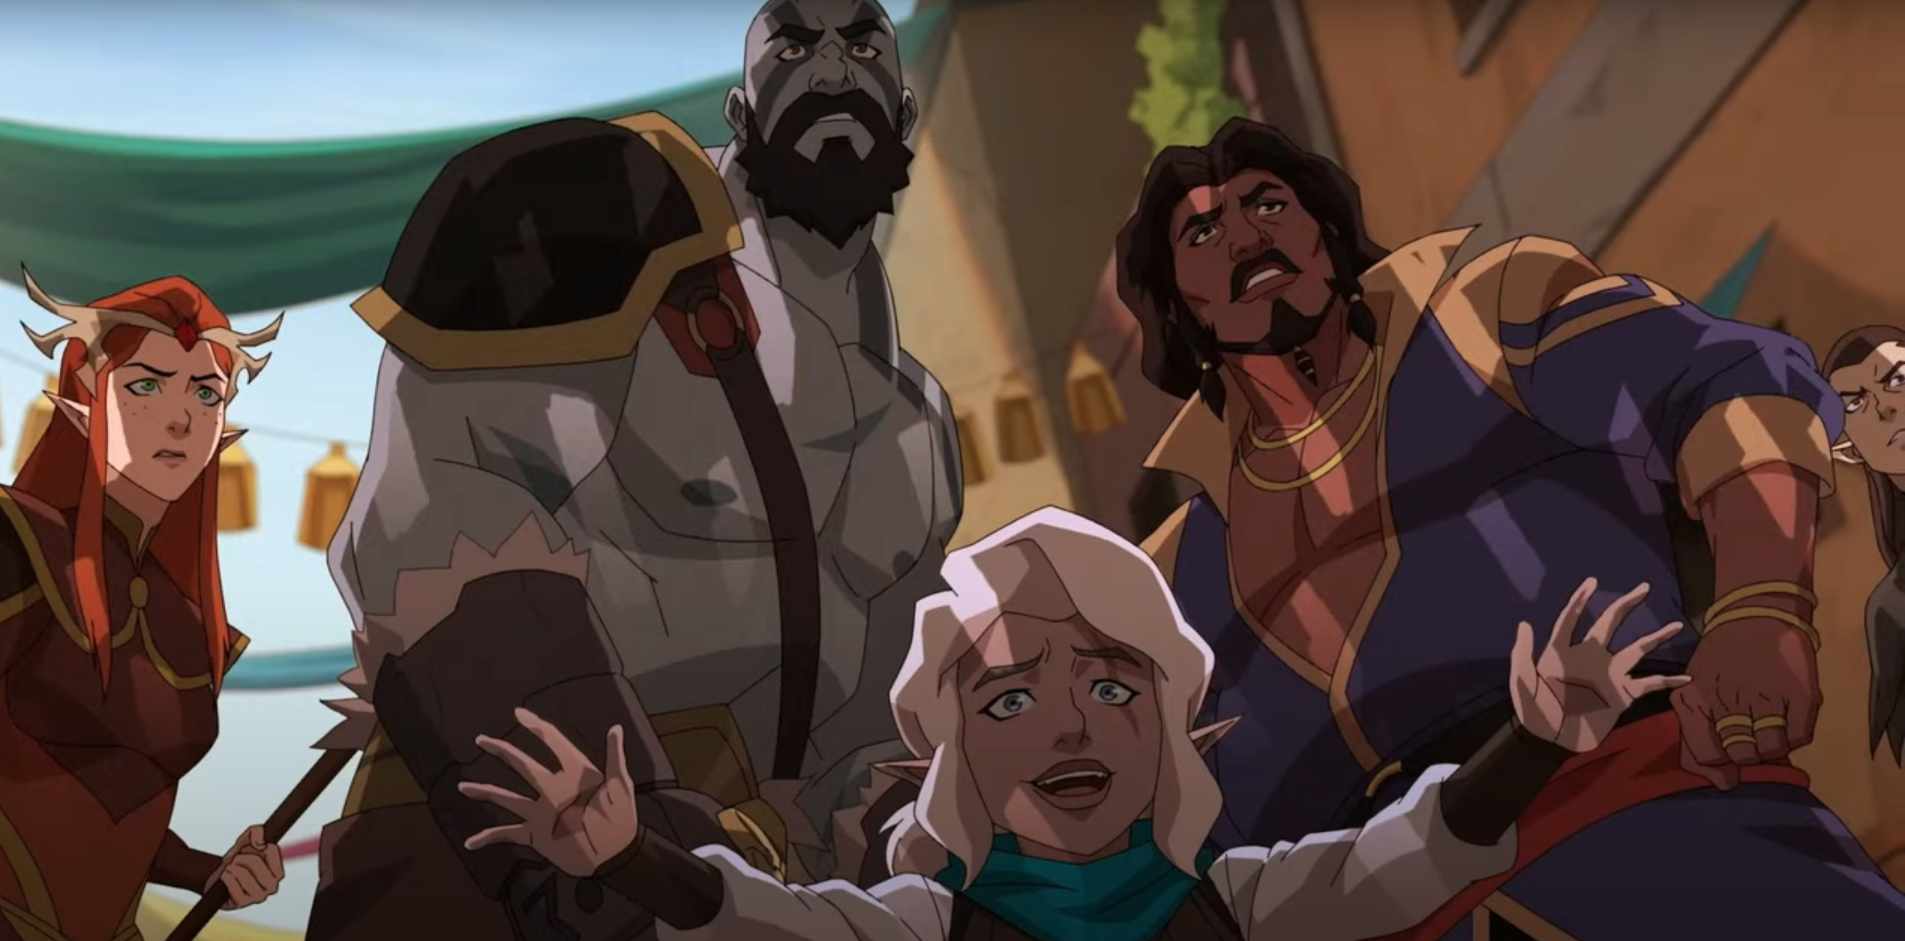 Pike, a tiny blonde gnome, tries to dissuade someone from attacking . Behind her is Grog, a grey-skinned Goliath. Keyleth, a redhaired druid, stands to the left, with Gilmore, a fabulous wizard in purple robes, on the right.